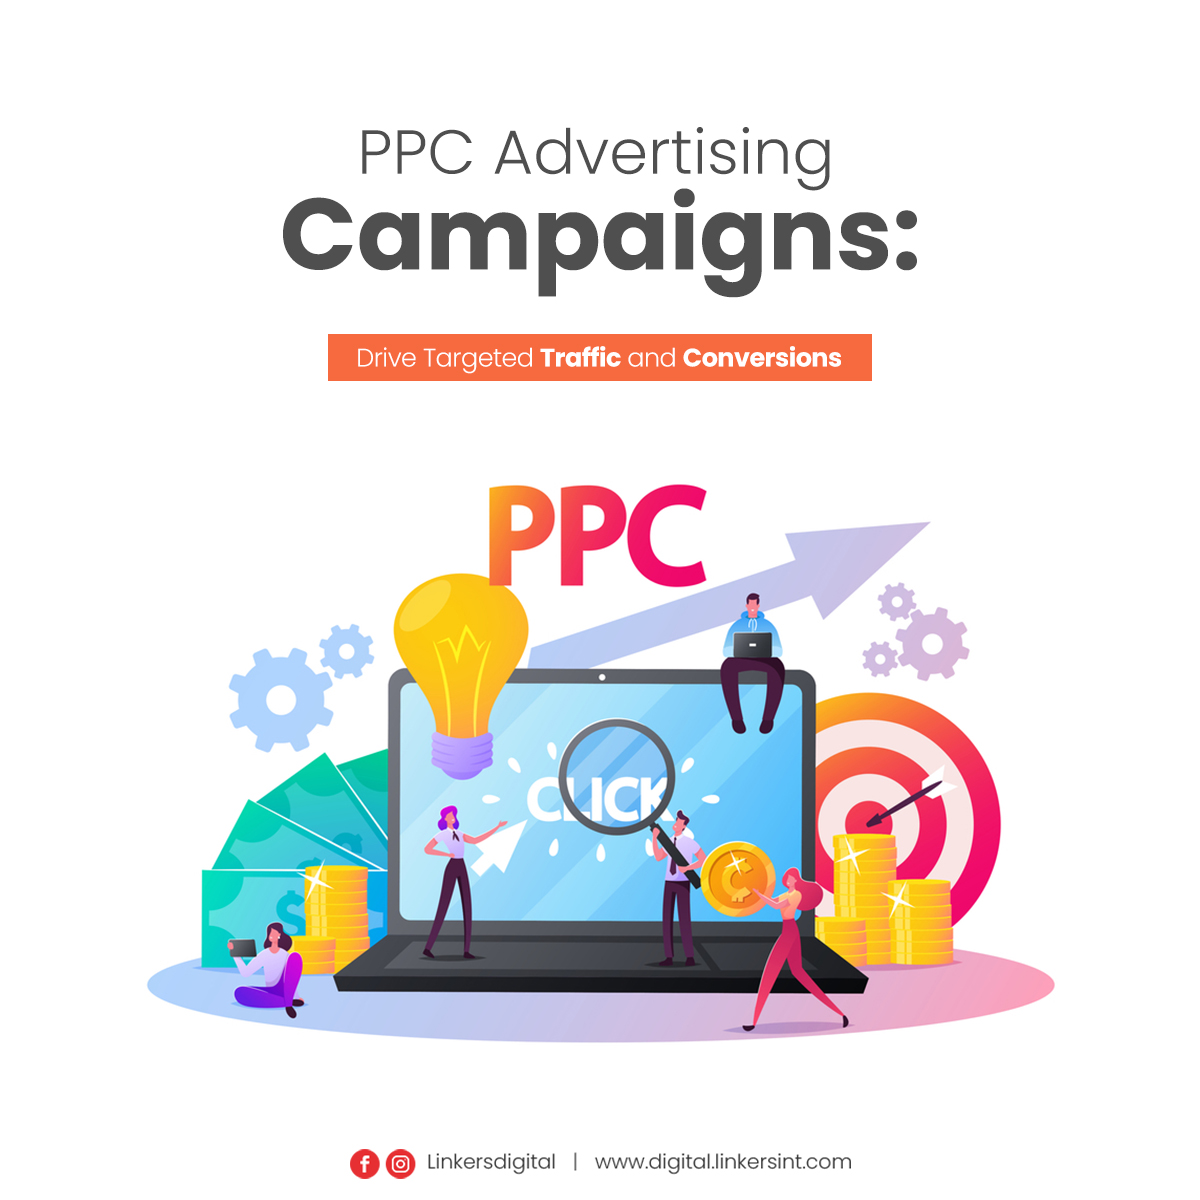 Maximize your online reach and conversions with our PPC advertising campaigns. Drive targeted traffic to your website, engage potential customers, and boost sales. Let Linkers Digital supercharge your marketing efforts and achieve measurable results.